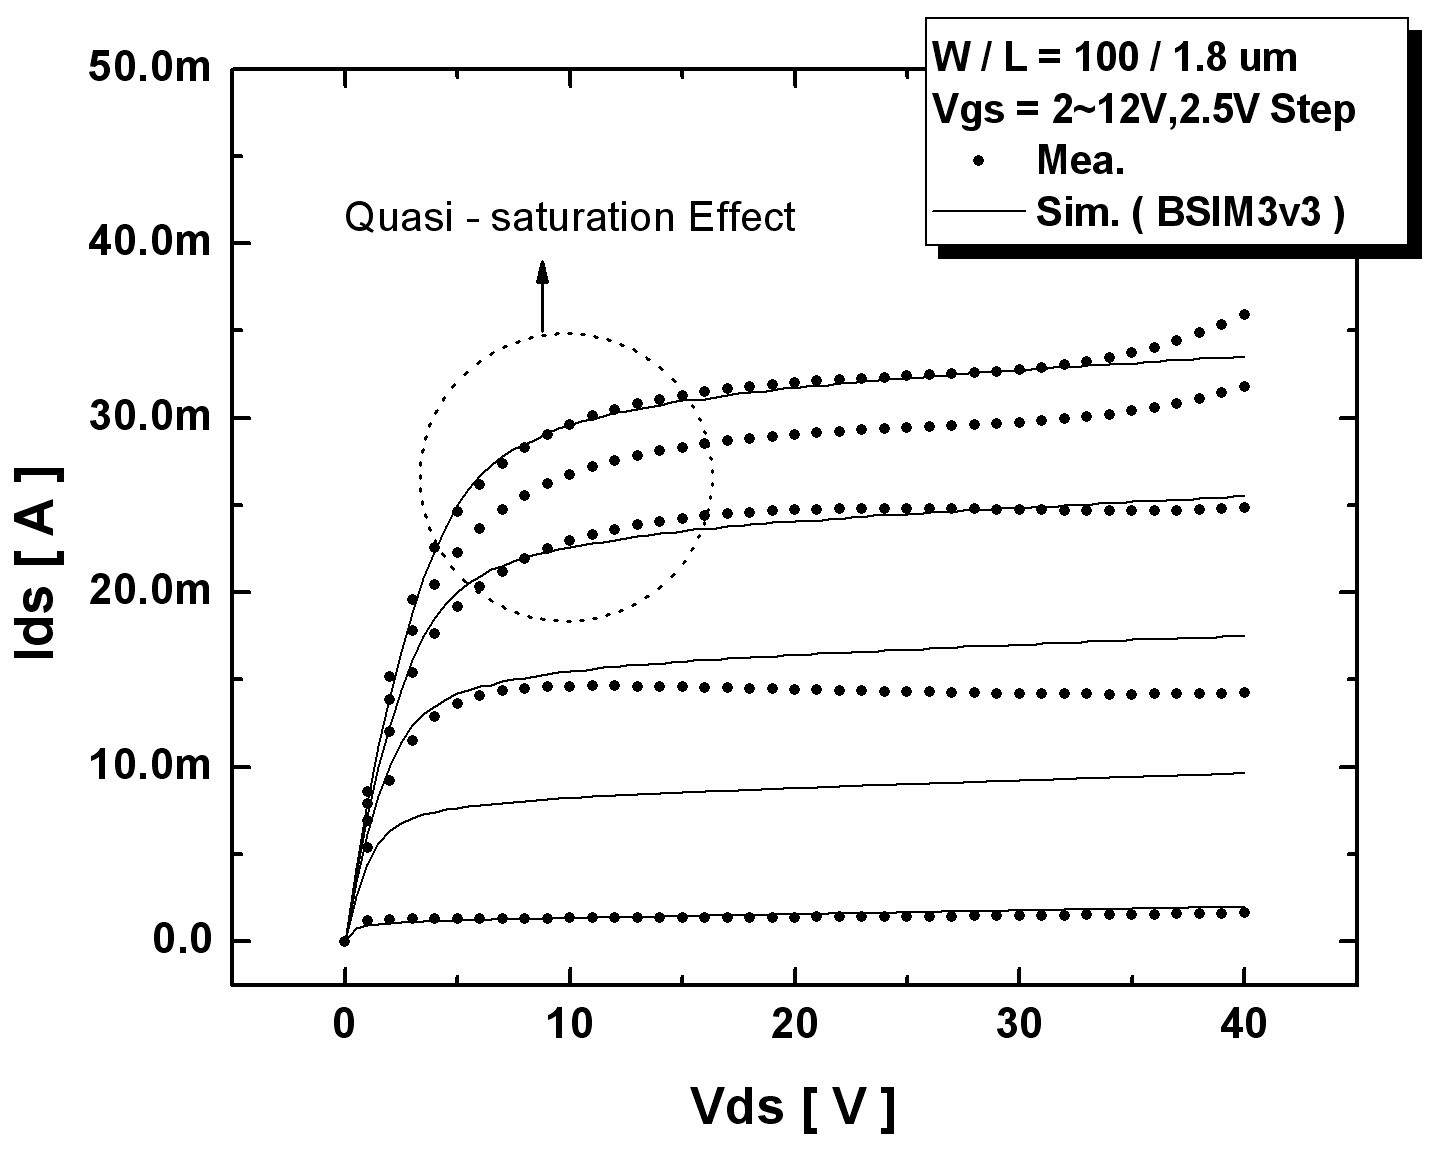 Drain current vs. drain bias (Id-Vds) characteristics of an HV LDMOS obtained using the conventional MOS SPICE model.